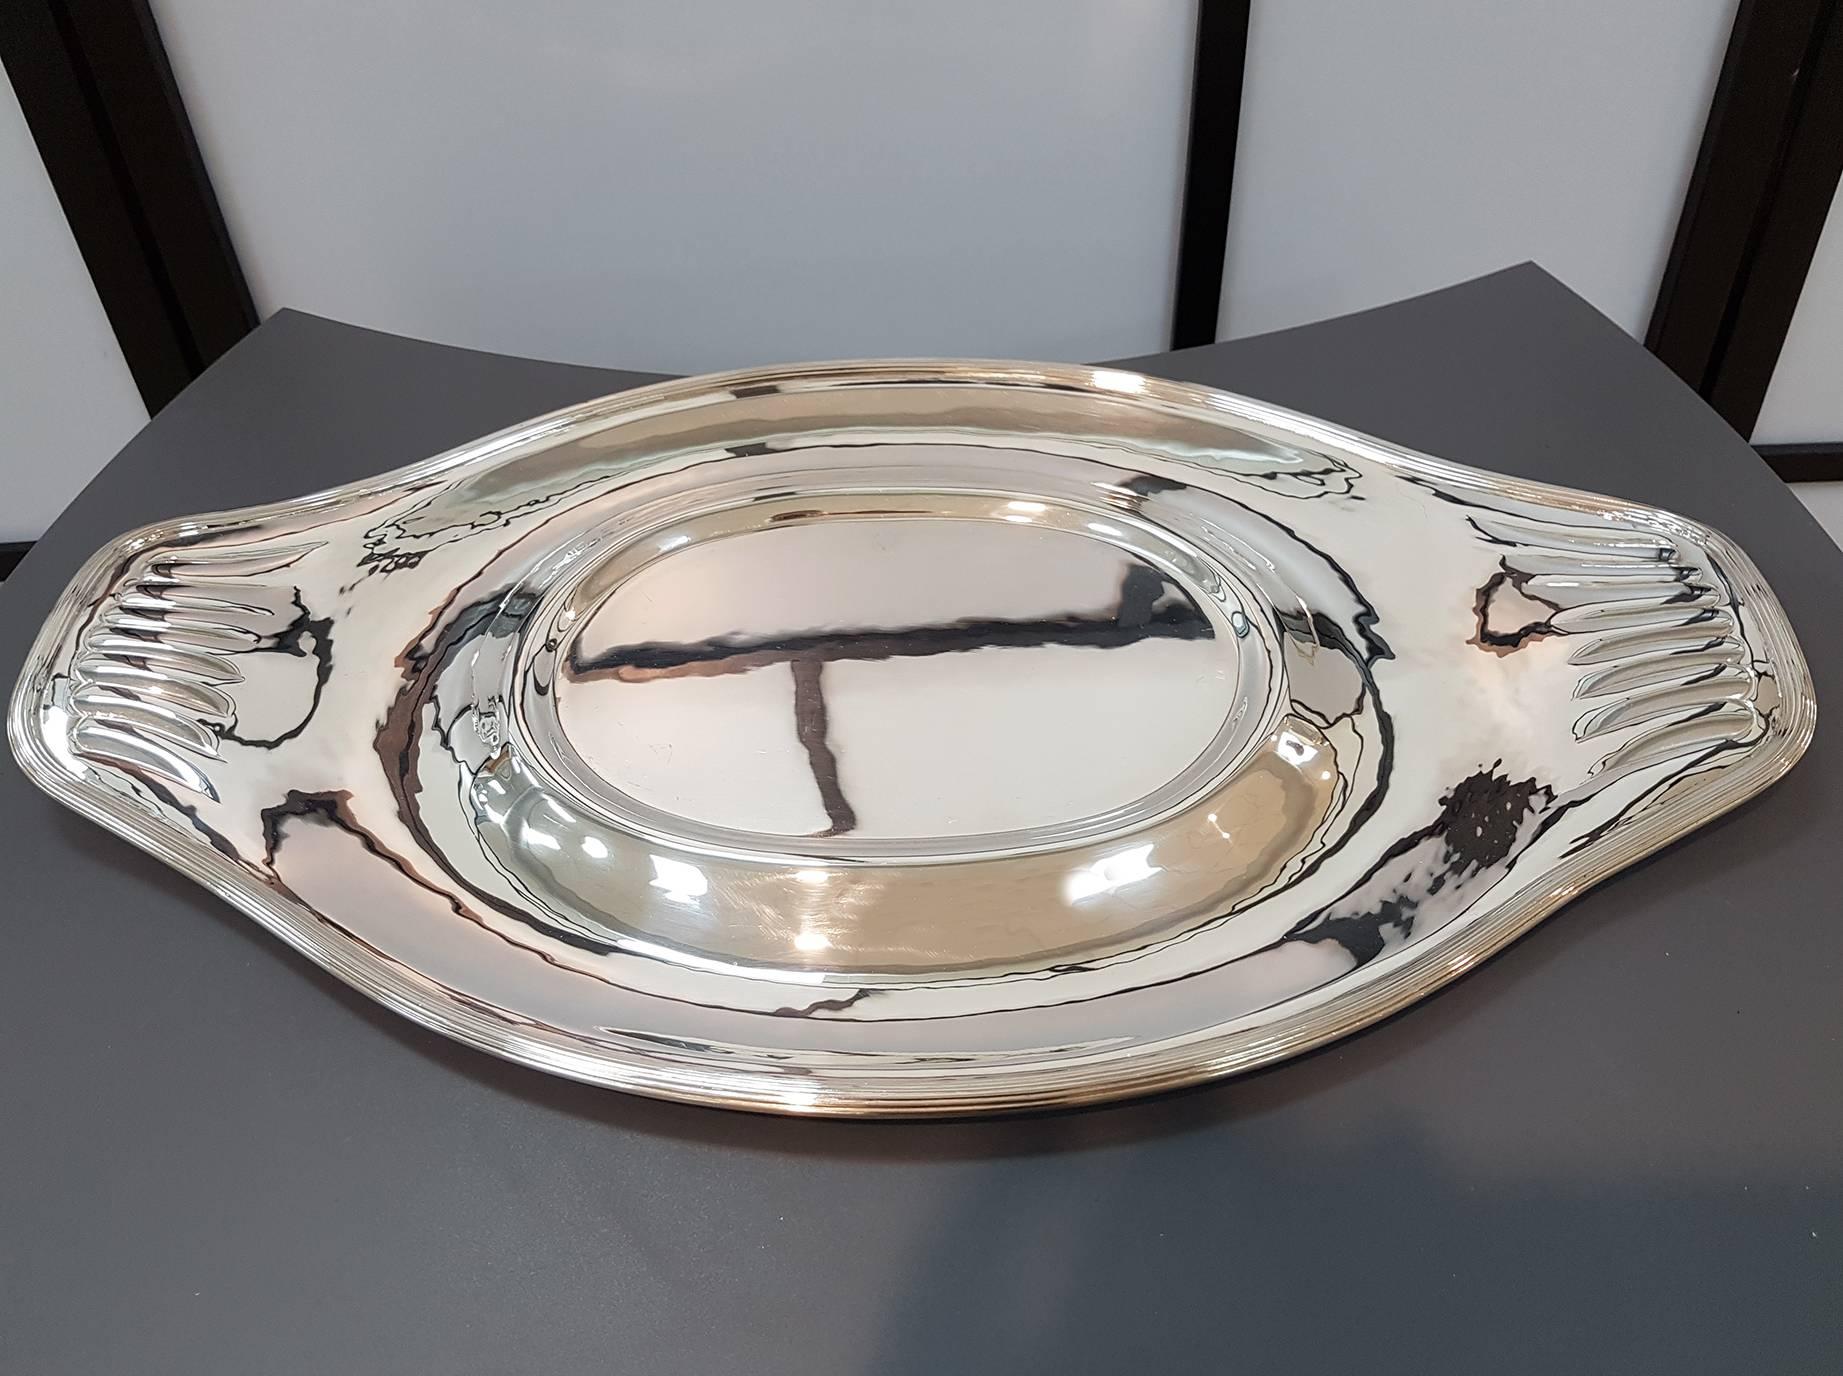 20th Century Italian Silver Tureen & Tray Adams revival. Enbossed ceased by hand For Sale 2